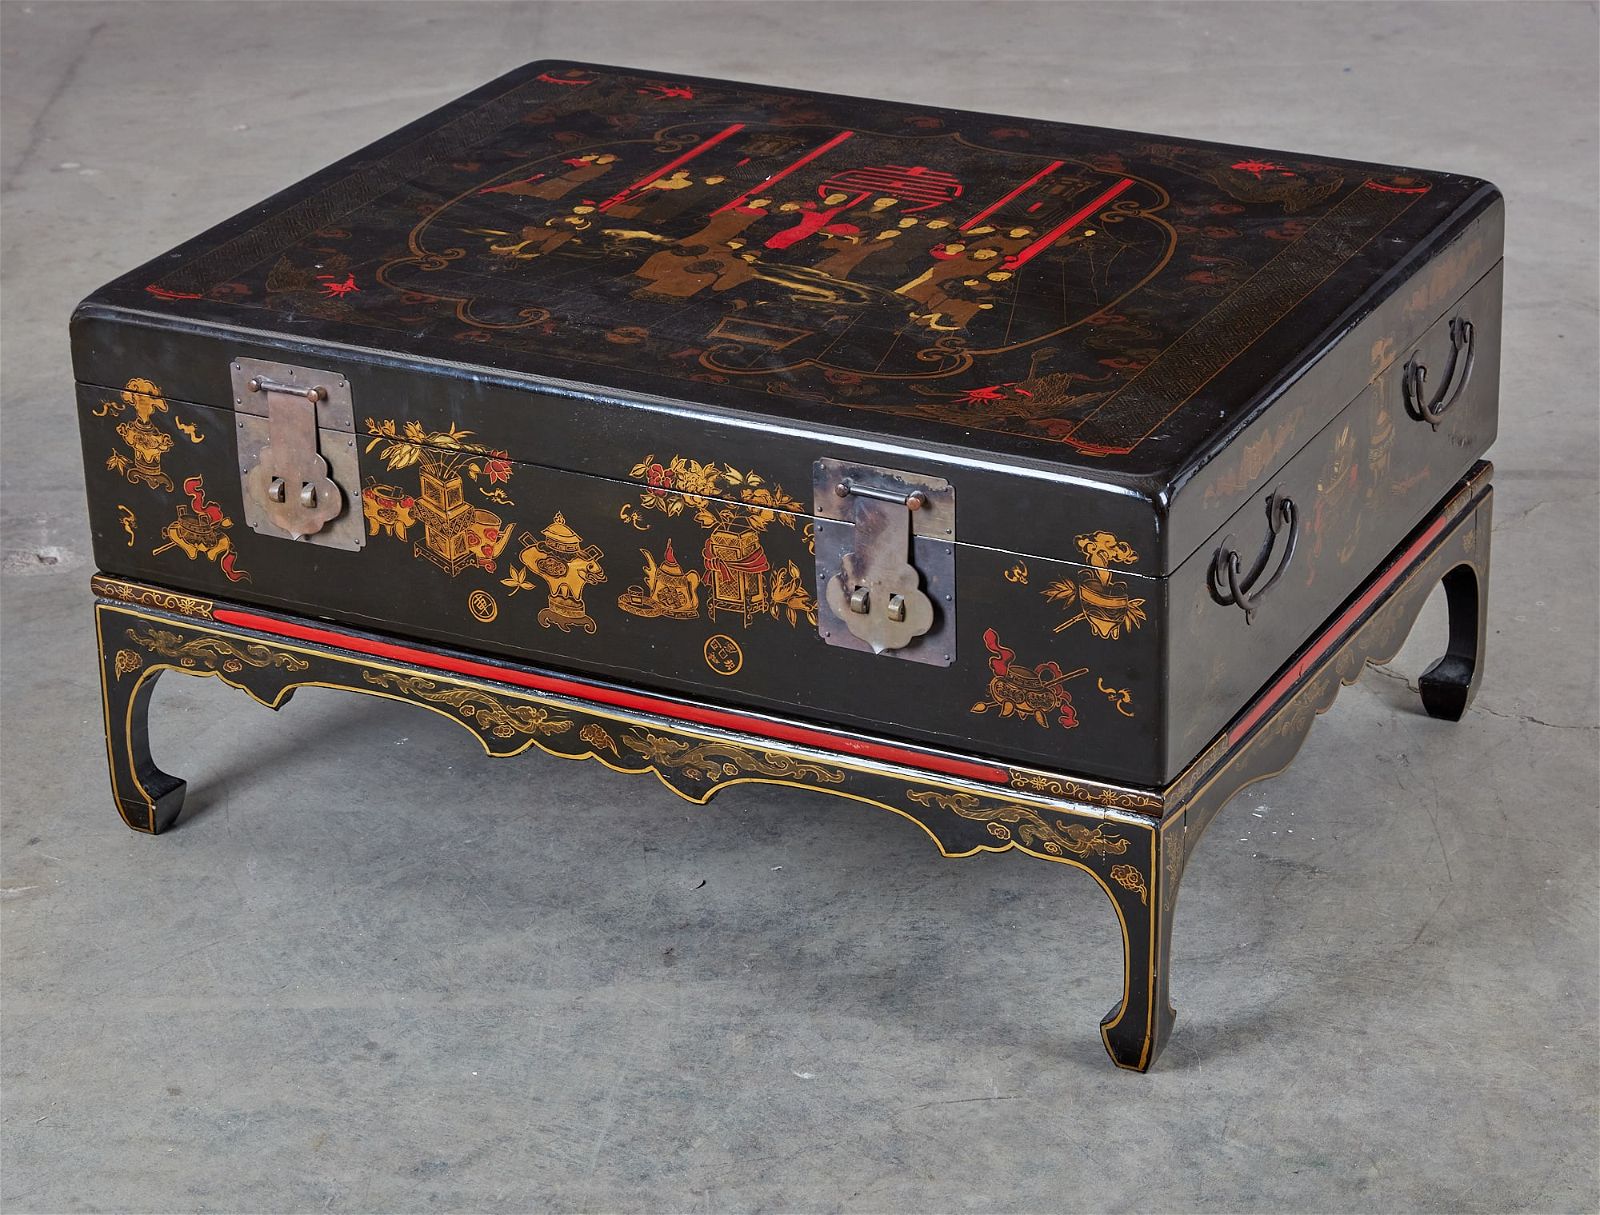 A CHINESE BLACK LACQUERED TRUNK 2fb42a0